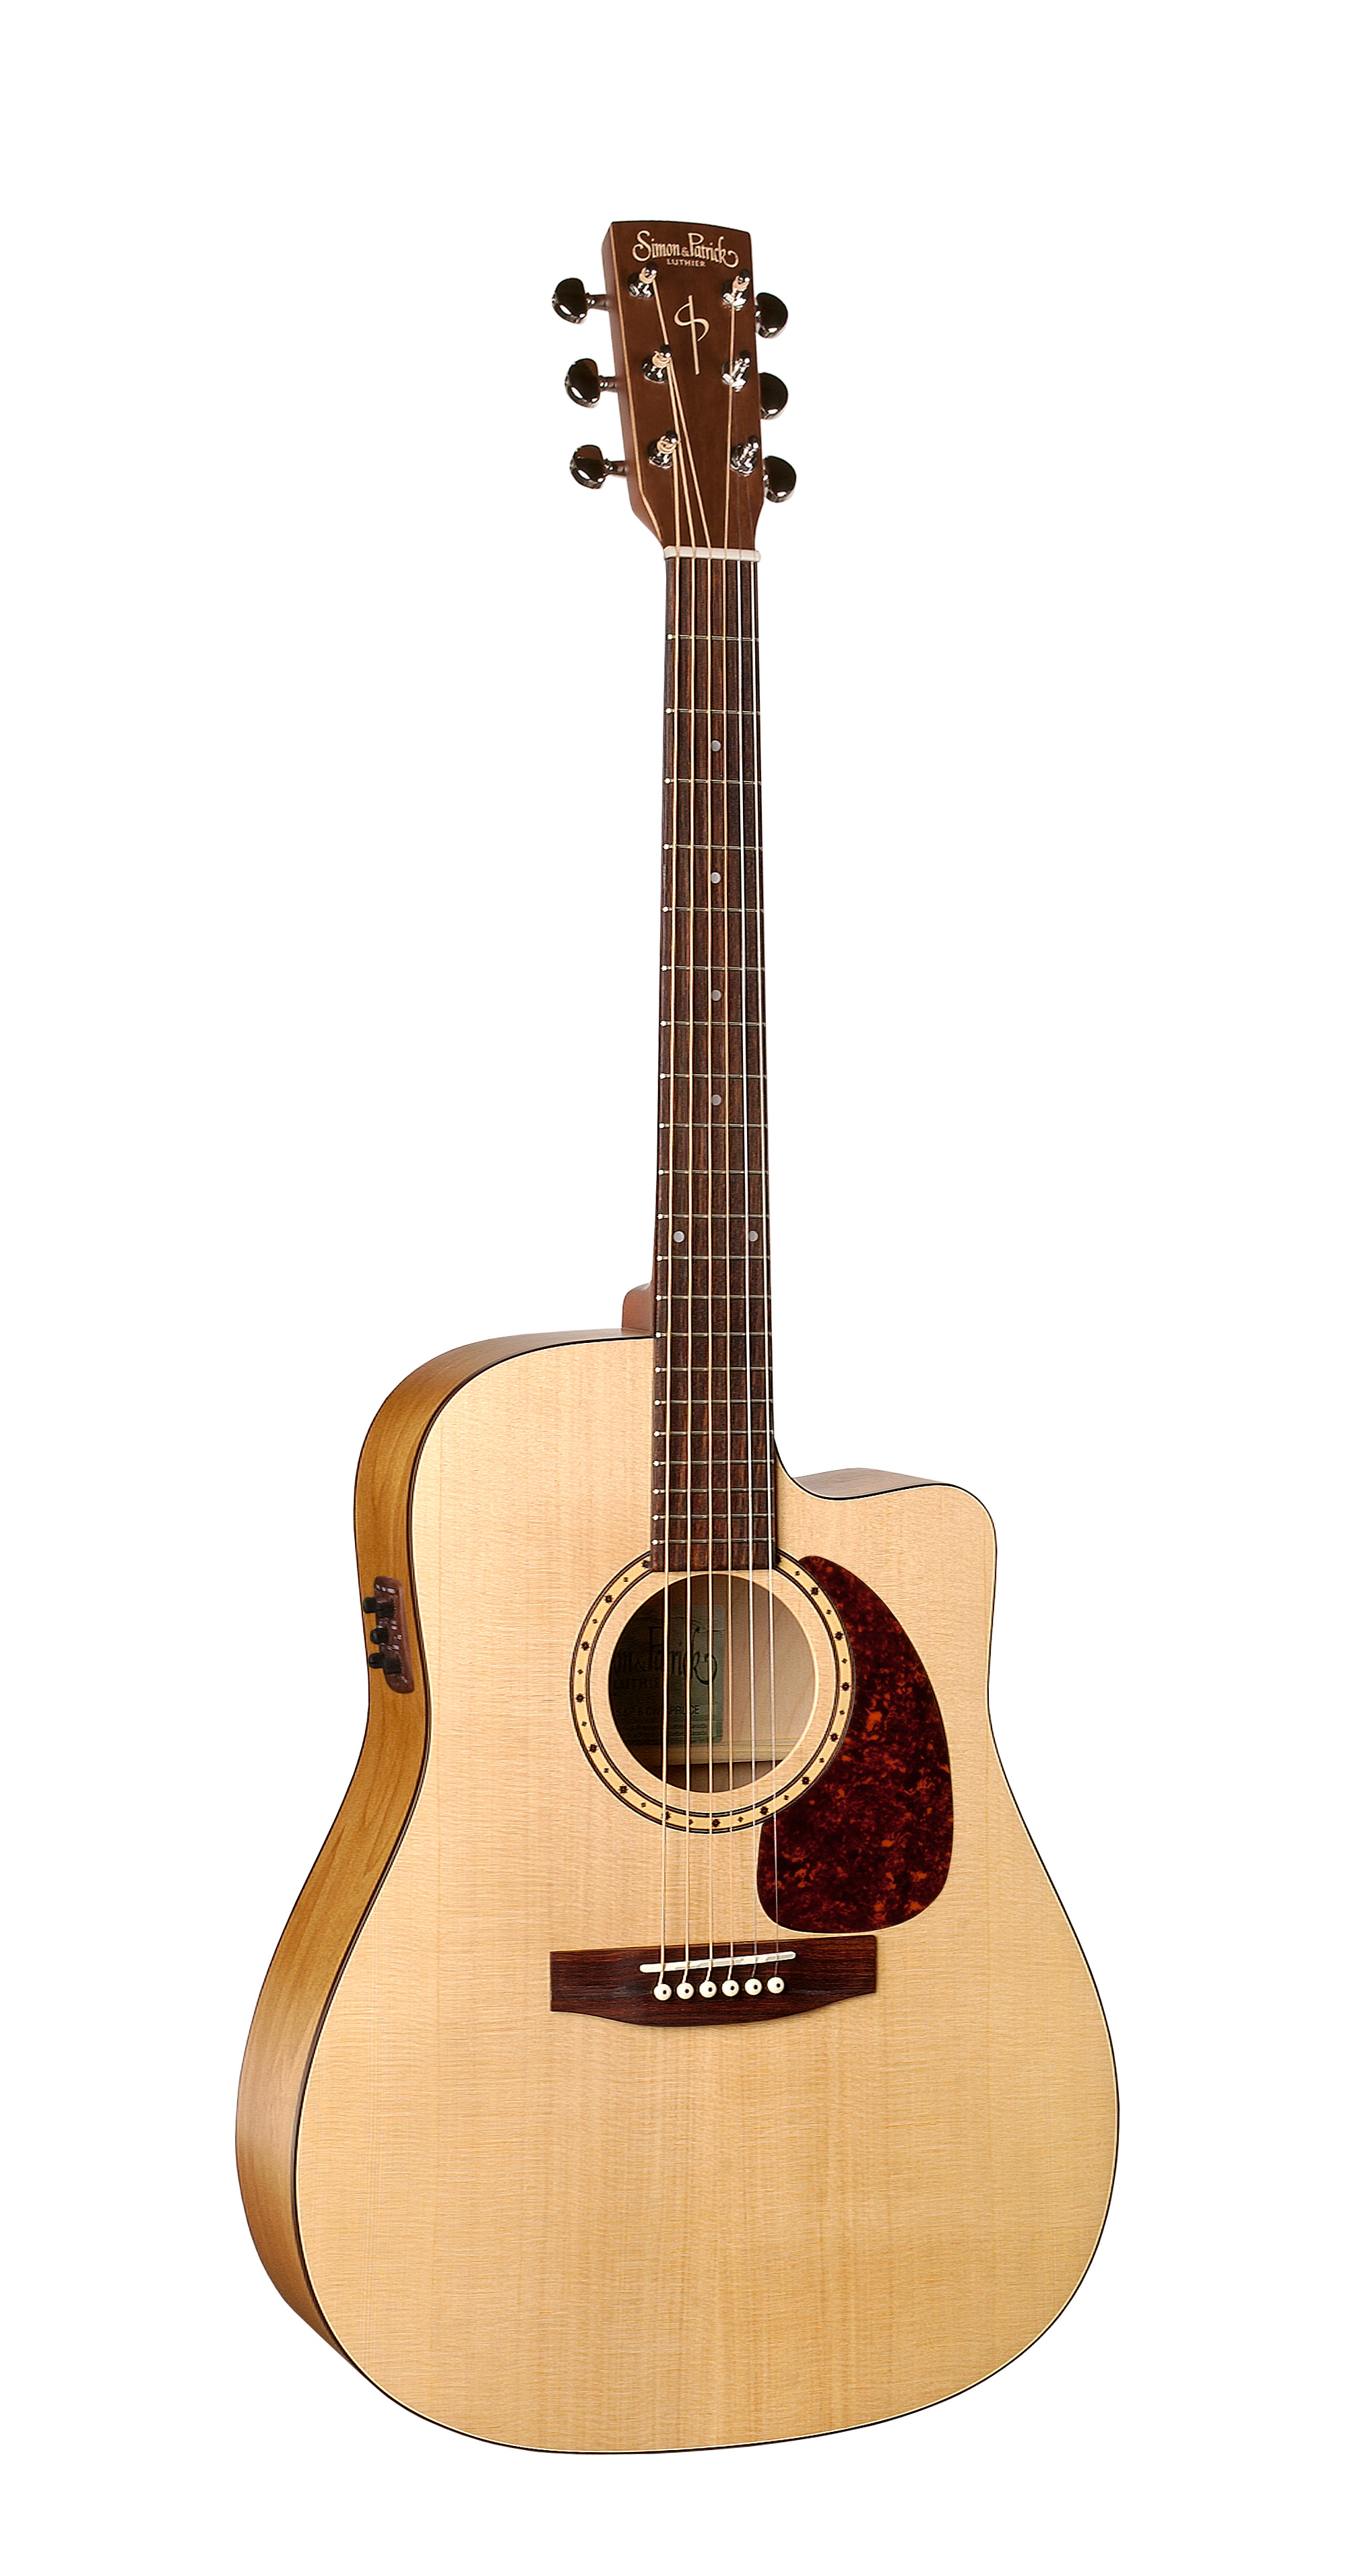 Simon & Patrick 29044 Woodland Spruce Cutaway Acoustic Electric